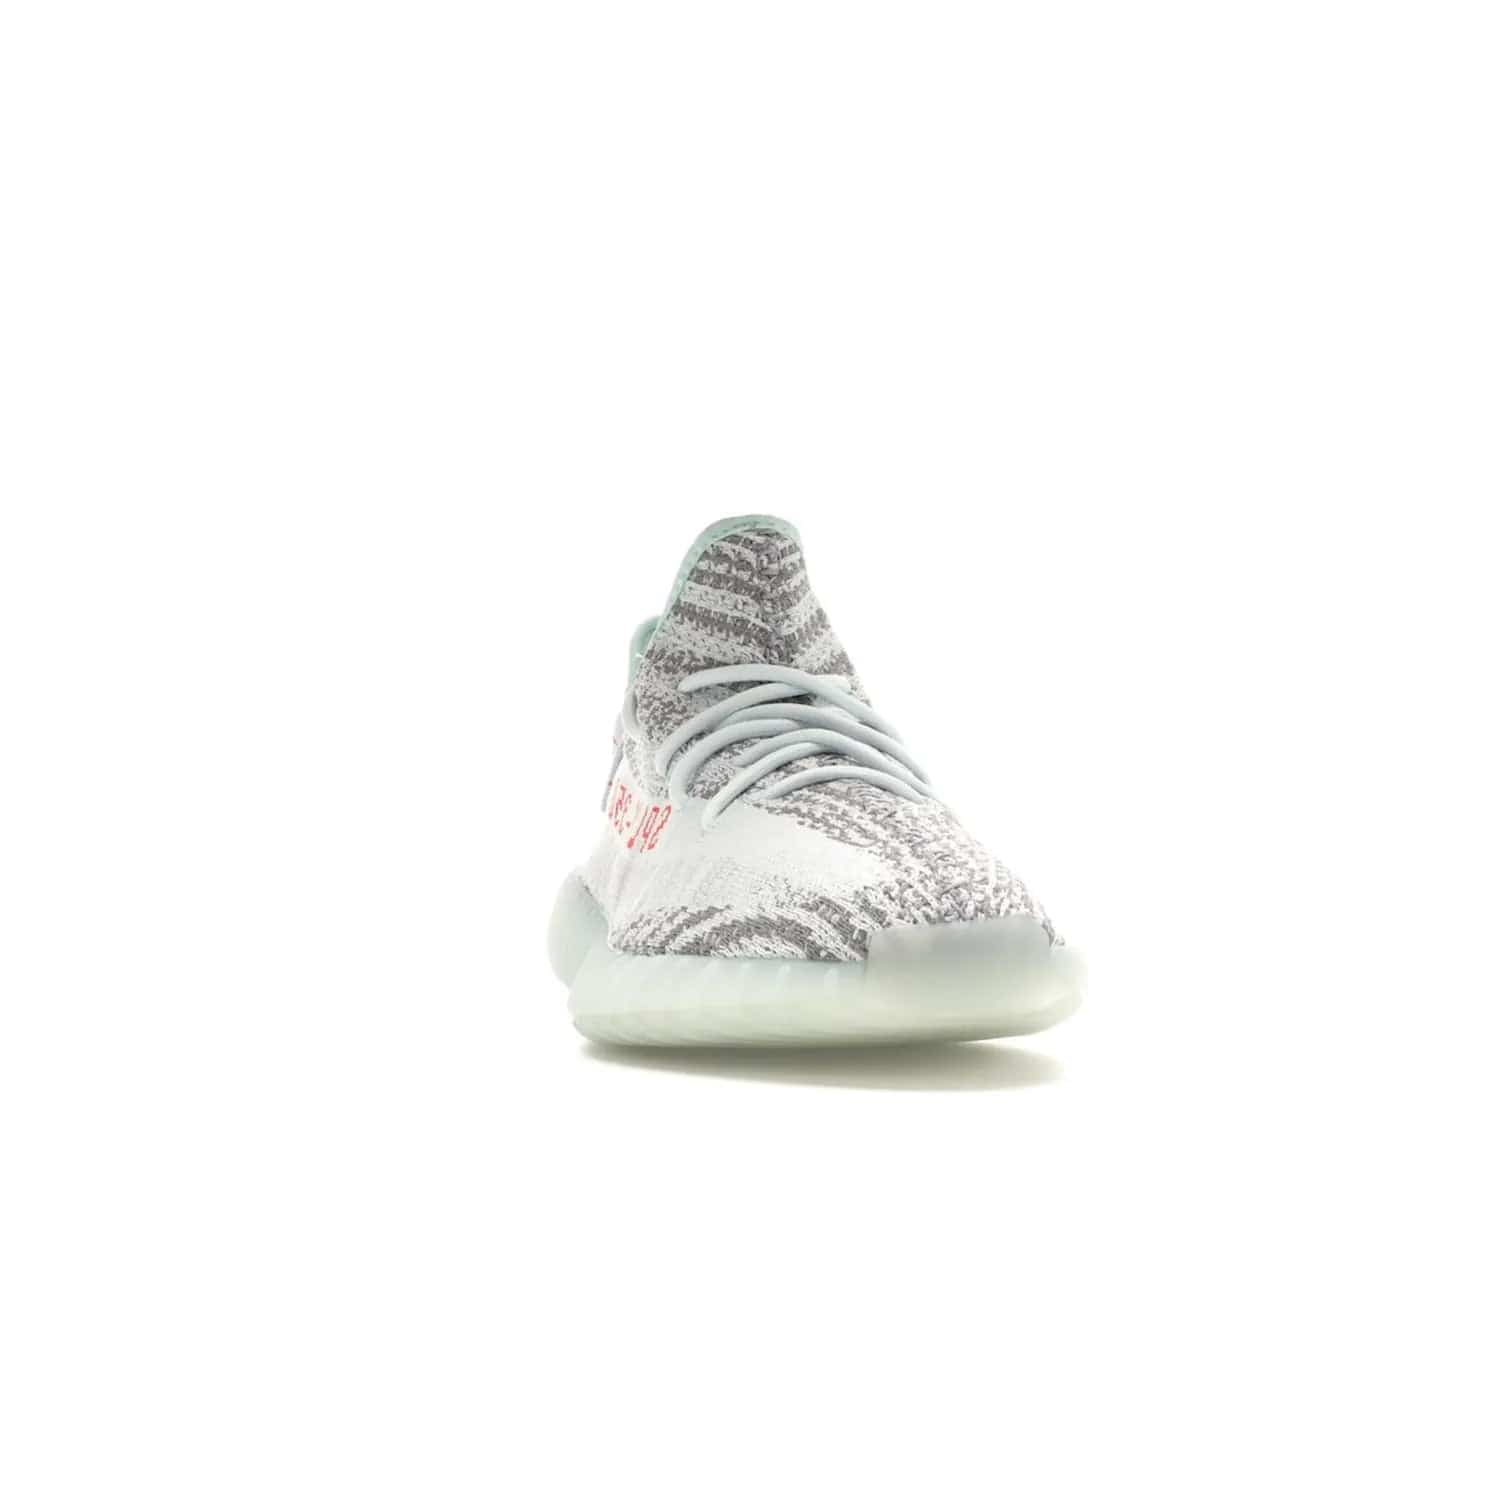 adidas Yeezy Boost 350 V2 Blue Tint - Image 9 - Only at www.BallersClubKickz.com - The adidas Yeezy Boost 350 V2 Blue Tint merges fashion and functionality with its Primeknit upper and Boost sole. Released in December 2017, this luxurious sneaker is perfect for making a stylish statement.